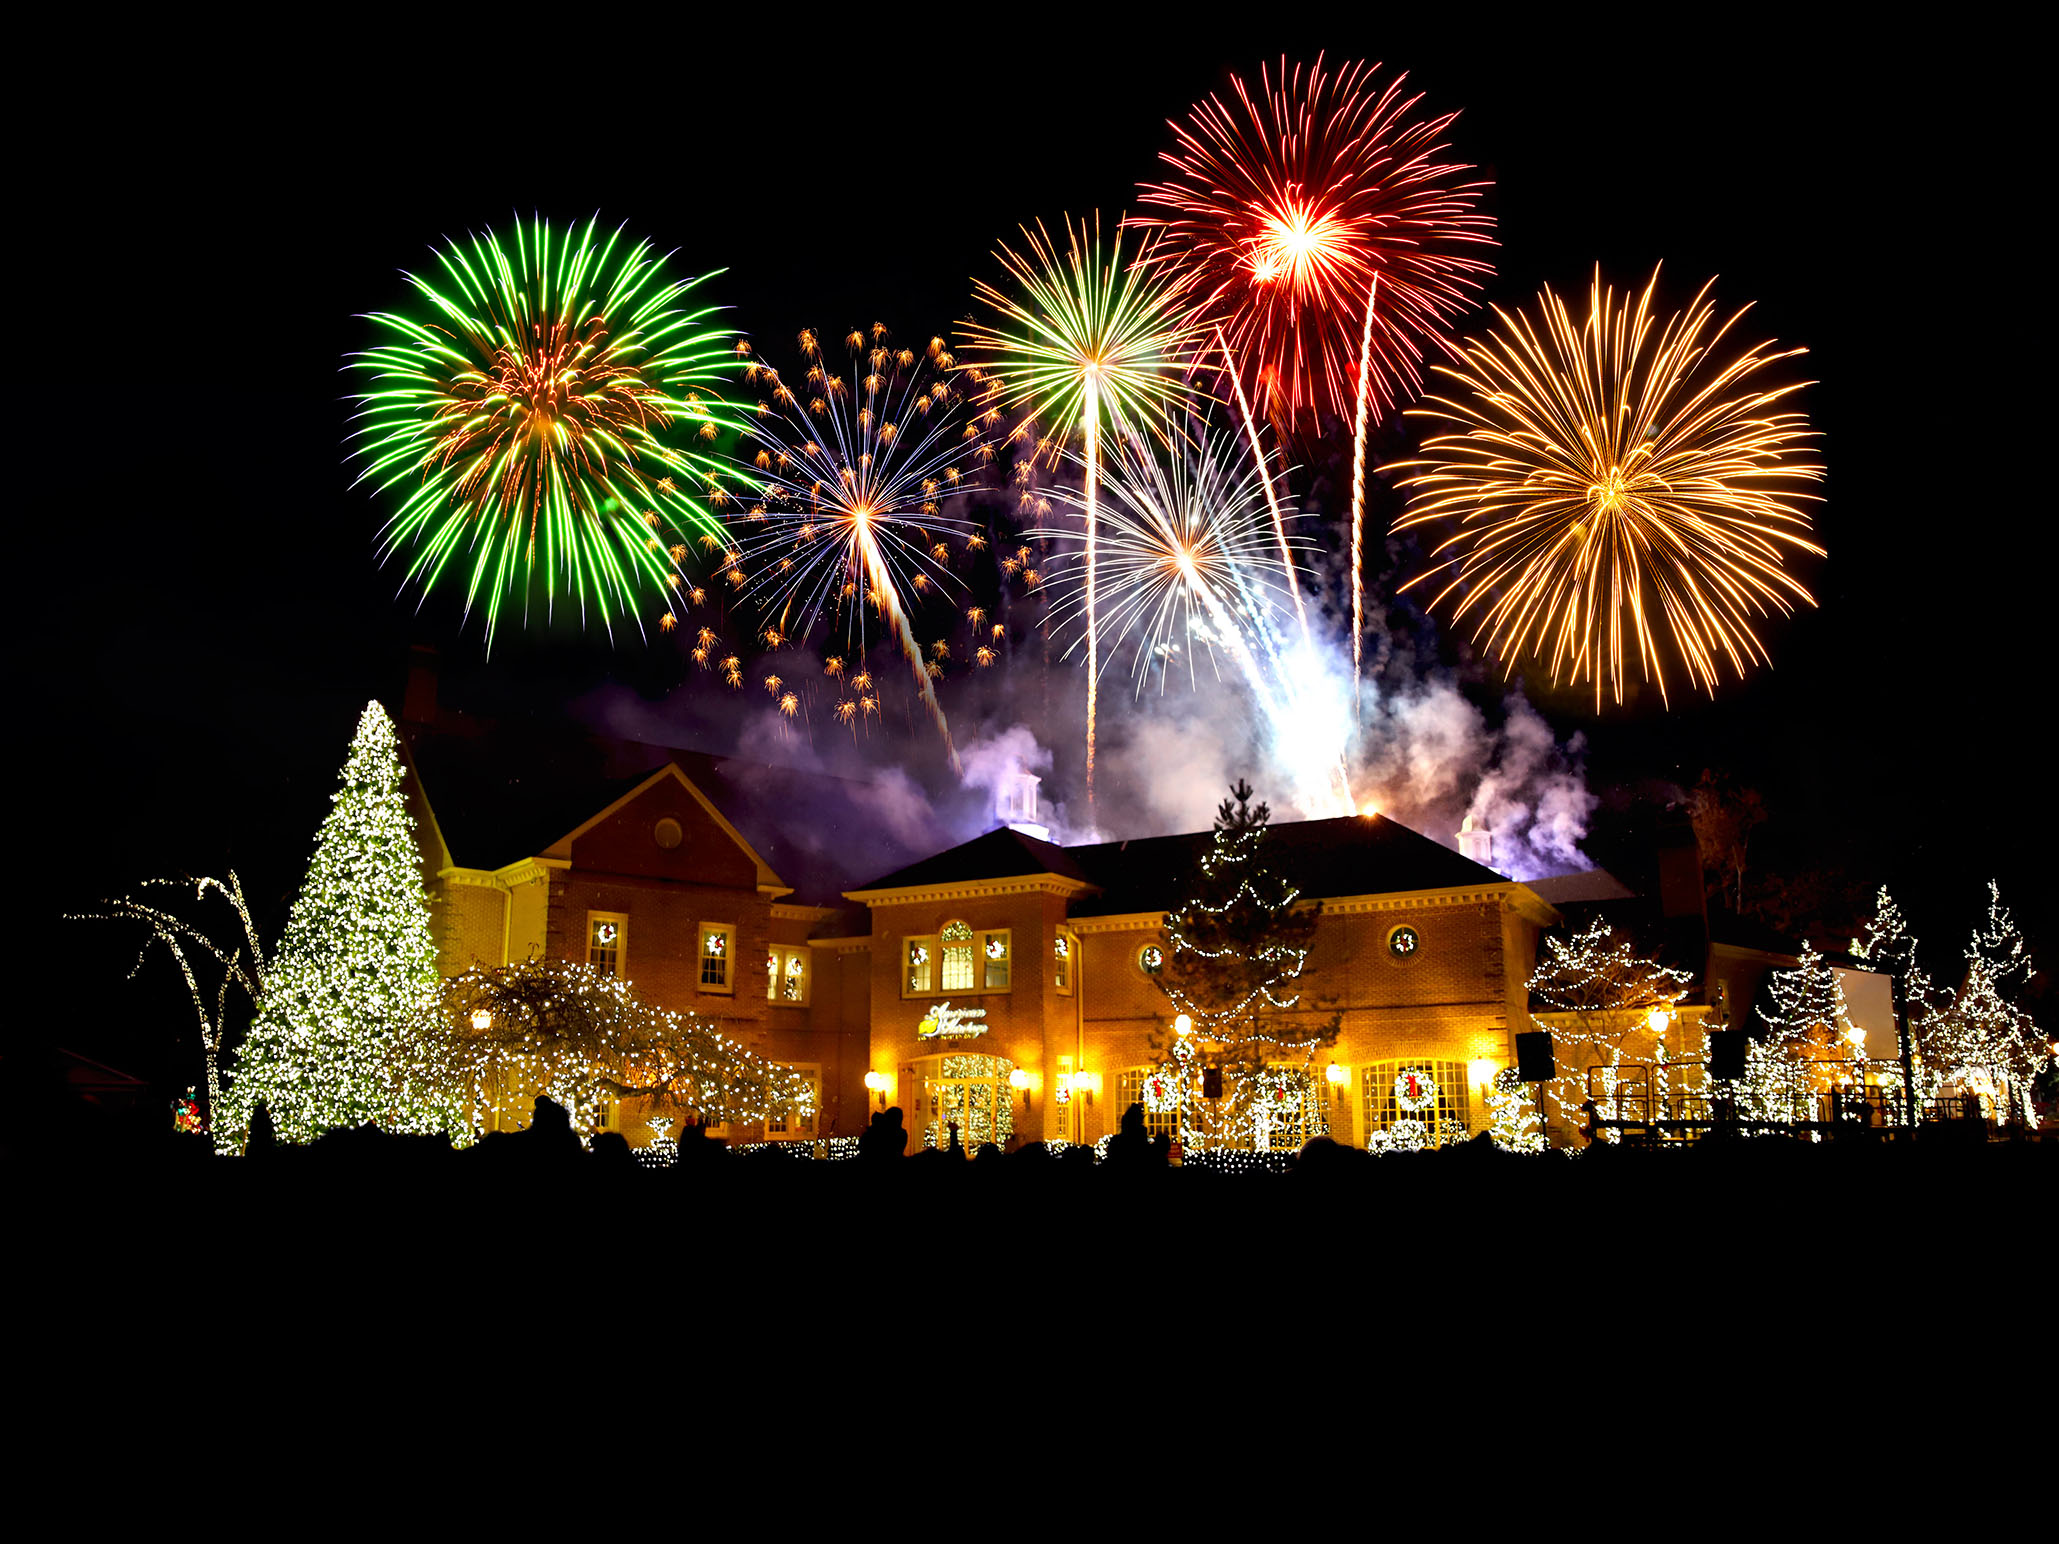 Fireworks display over American Heritage Carriage House Branch